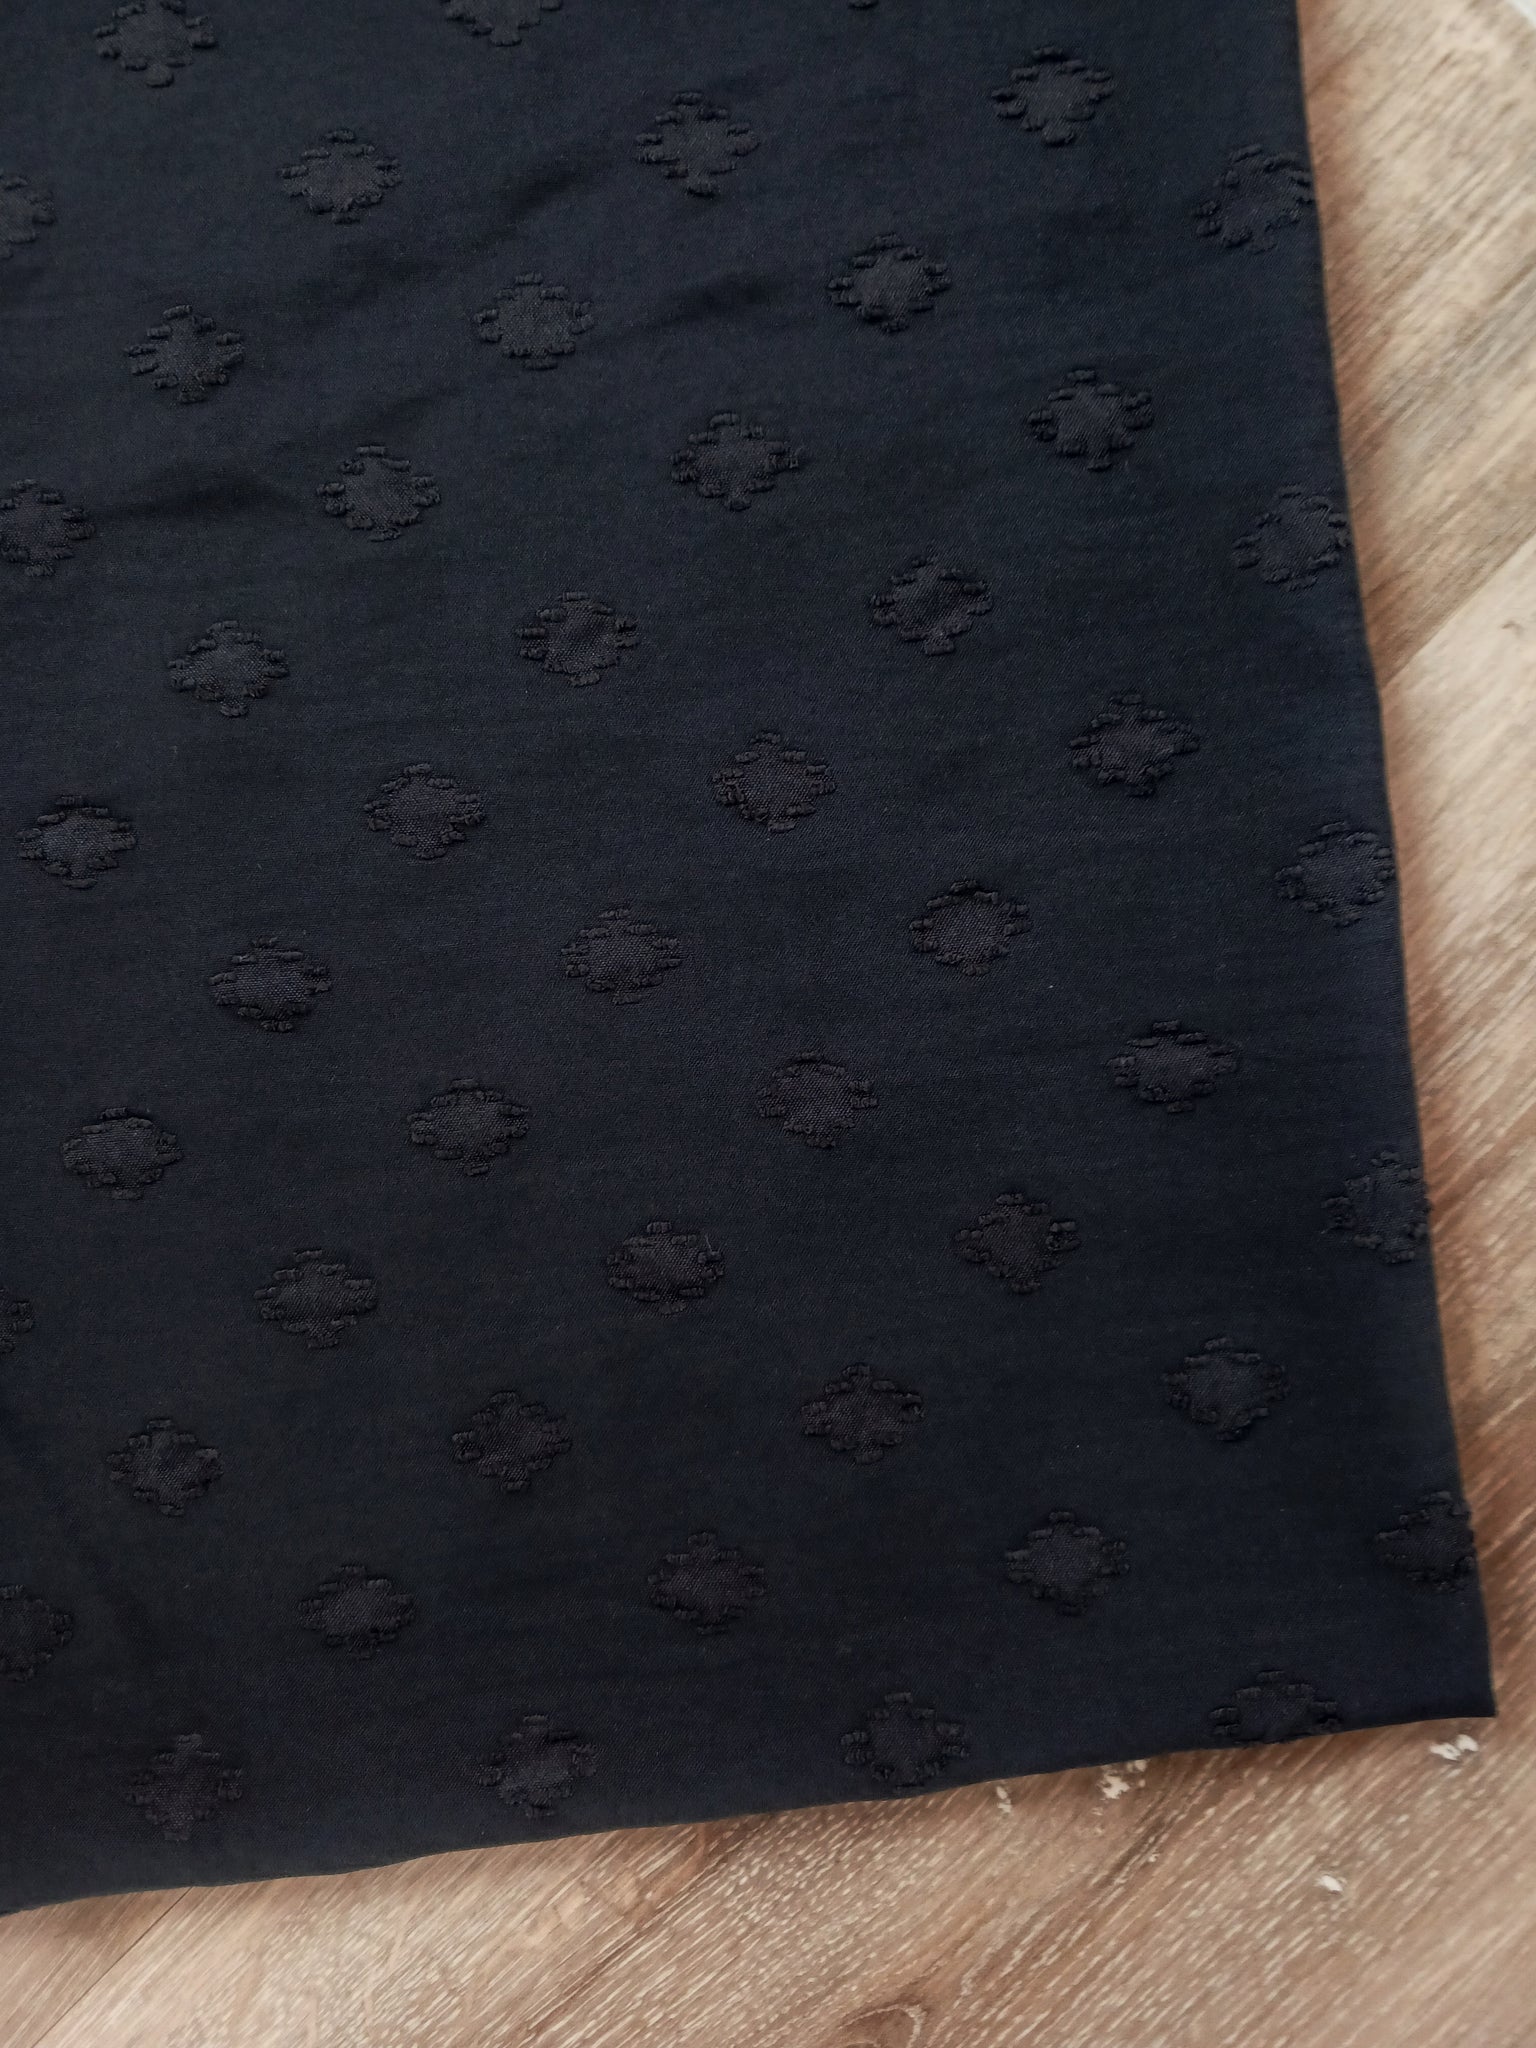 Black Diamonds on Poly | Textured Solids Swiss Dot|By the Half Yard